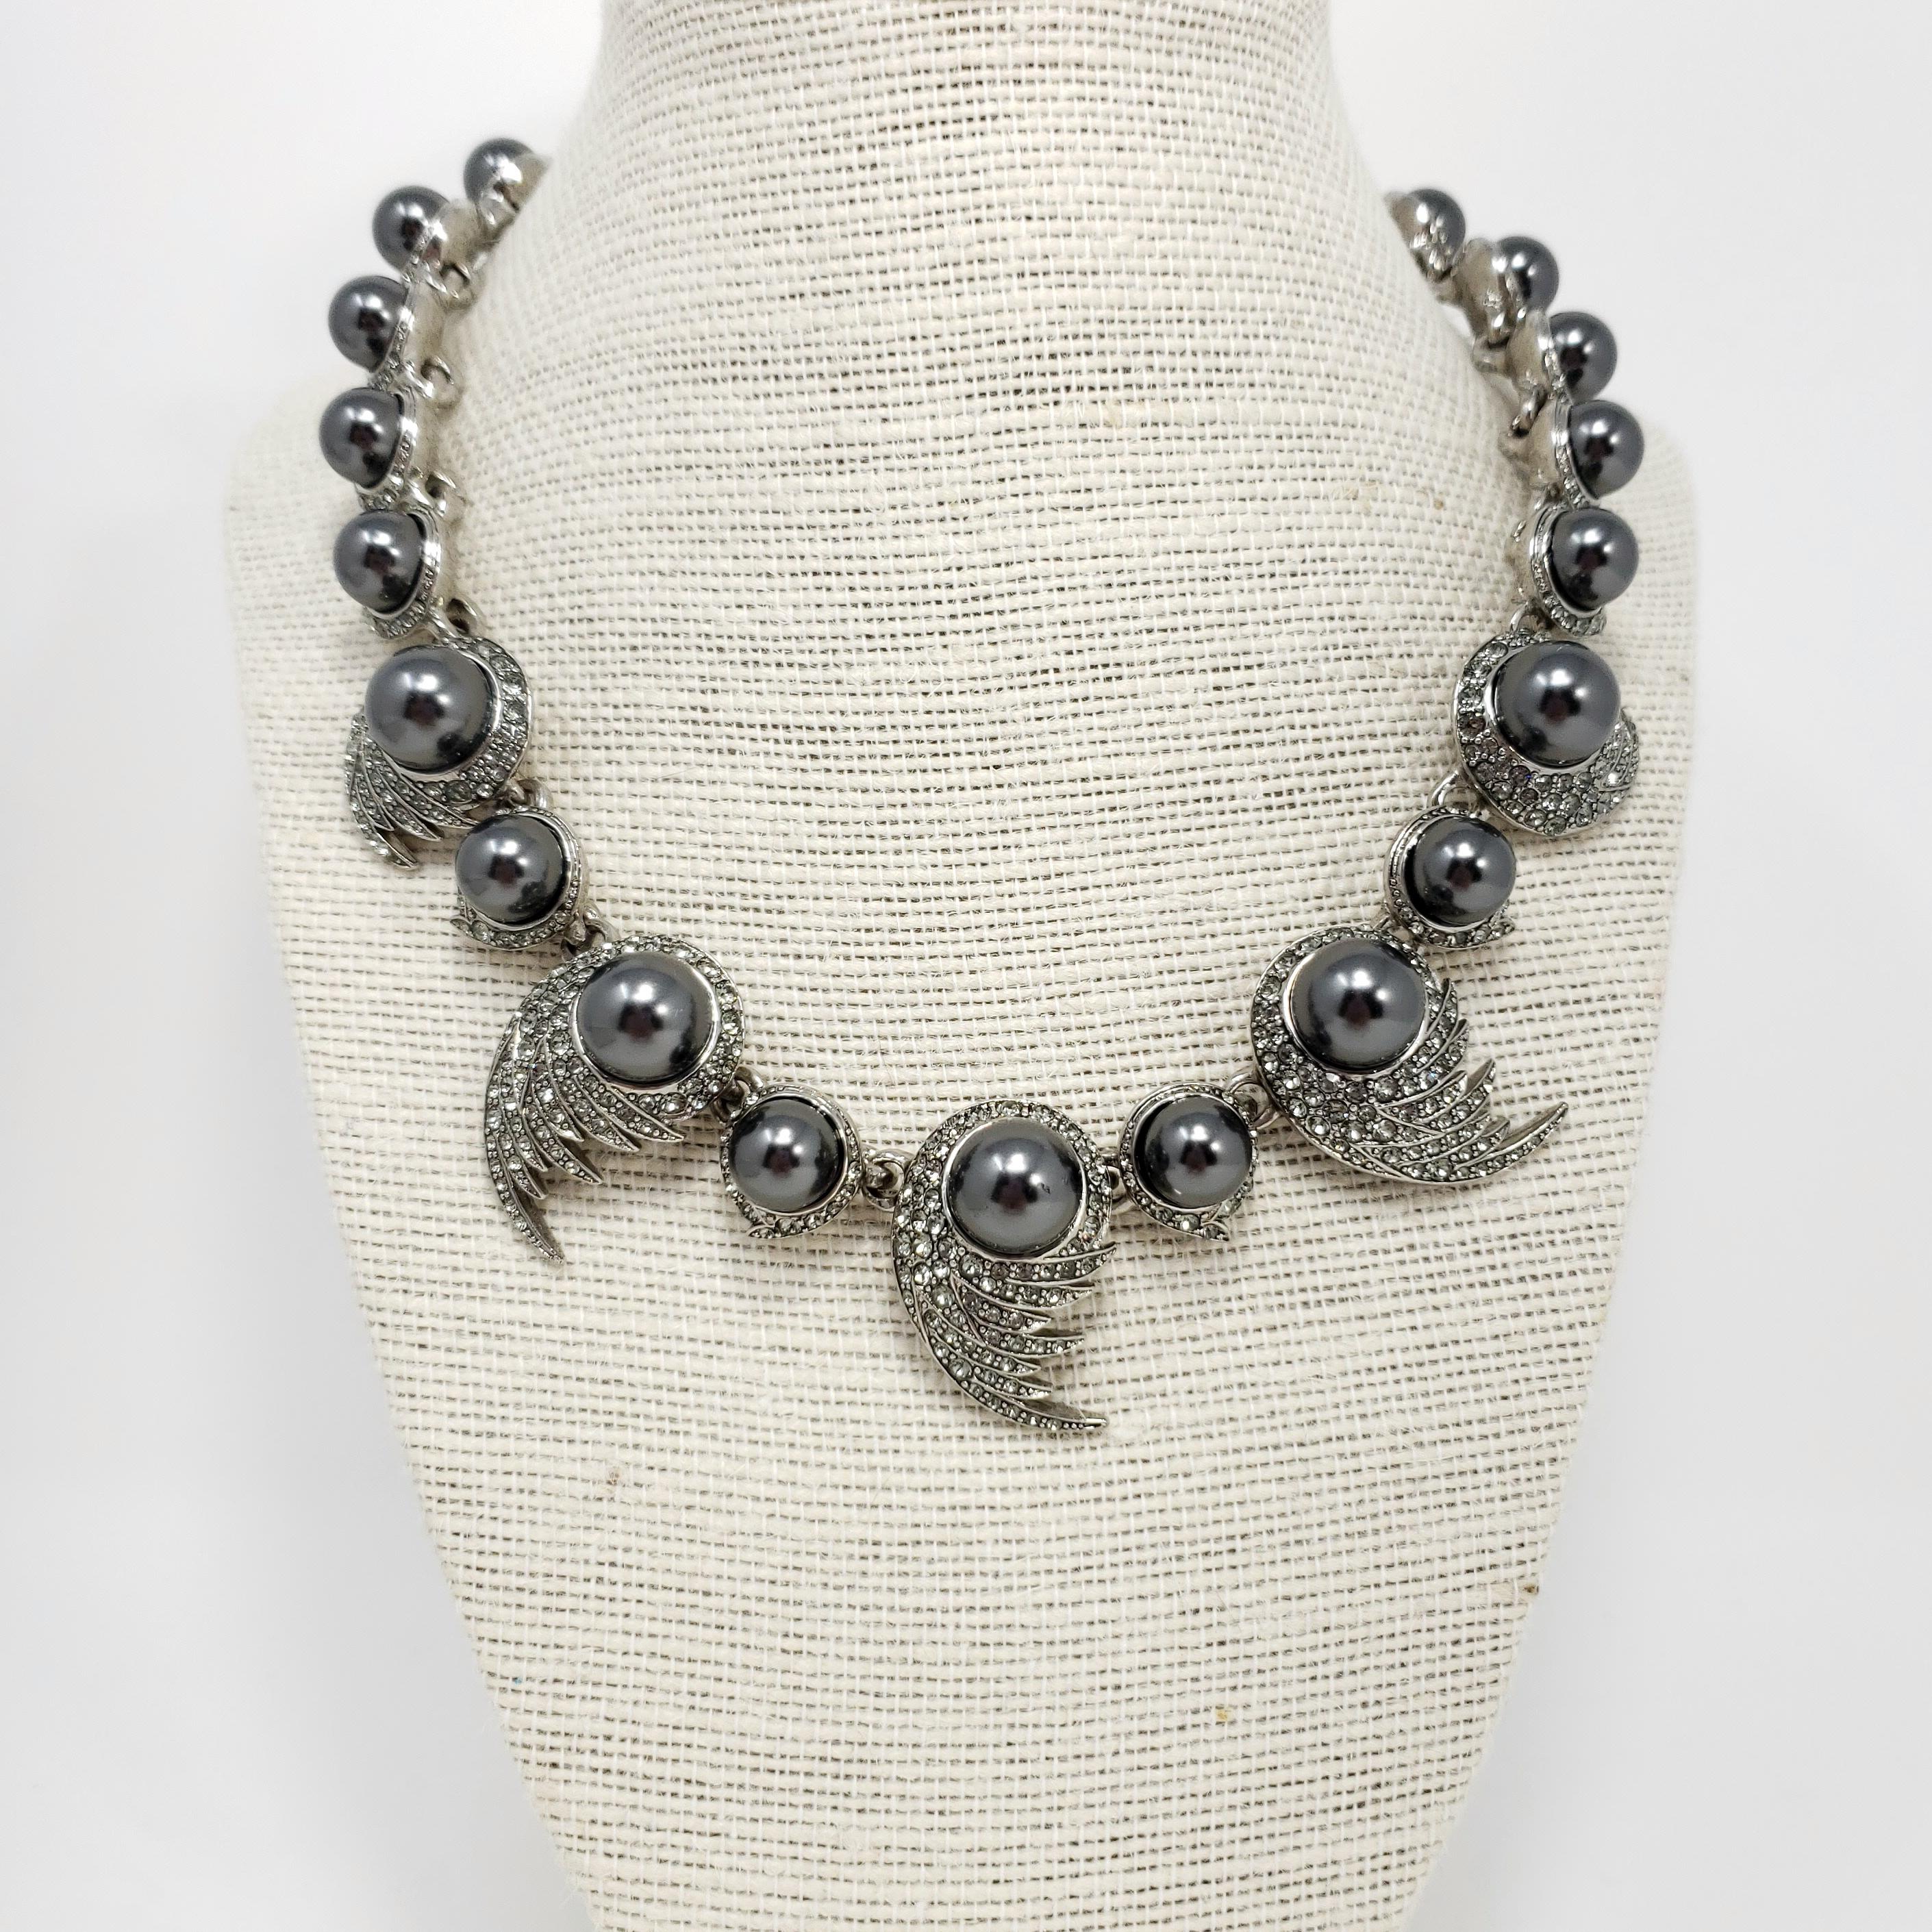 A stylish Oscar de la Renta link necklace decorated with faux Tahitian pearls and glittering Swarovski crystals.

Rhodium plated.

Hallmarks: Oscar de la Renta, Made in USA

Length: 15 to 19 inches